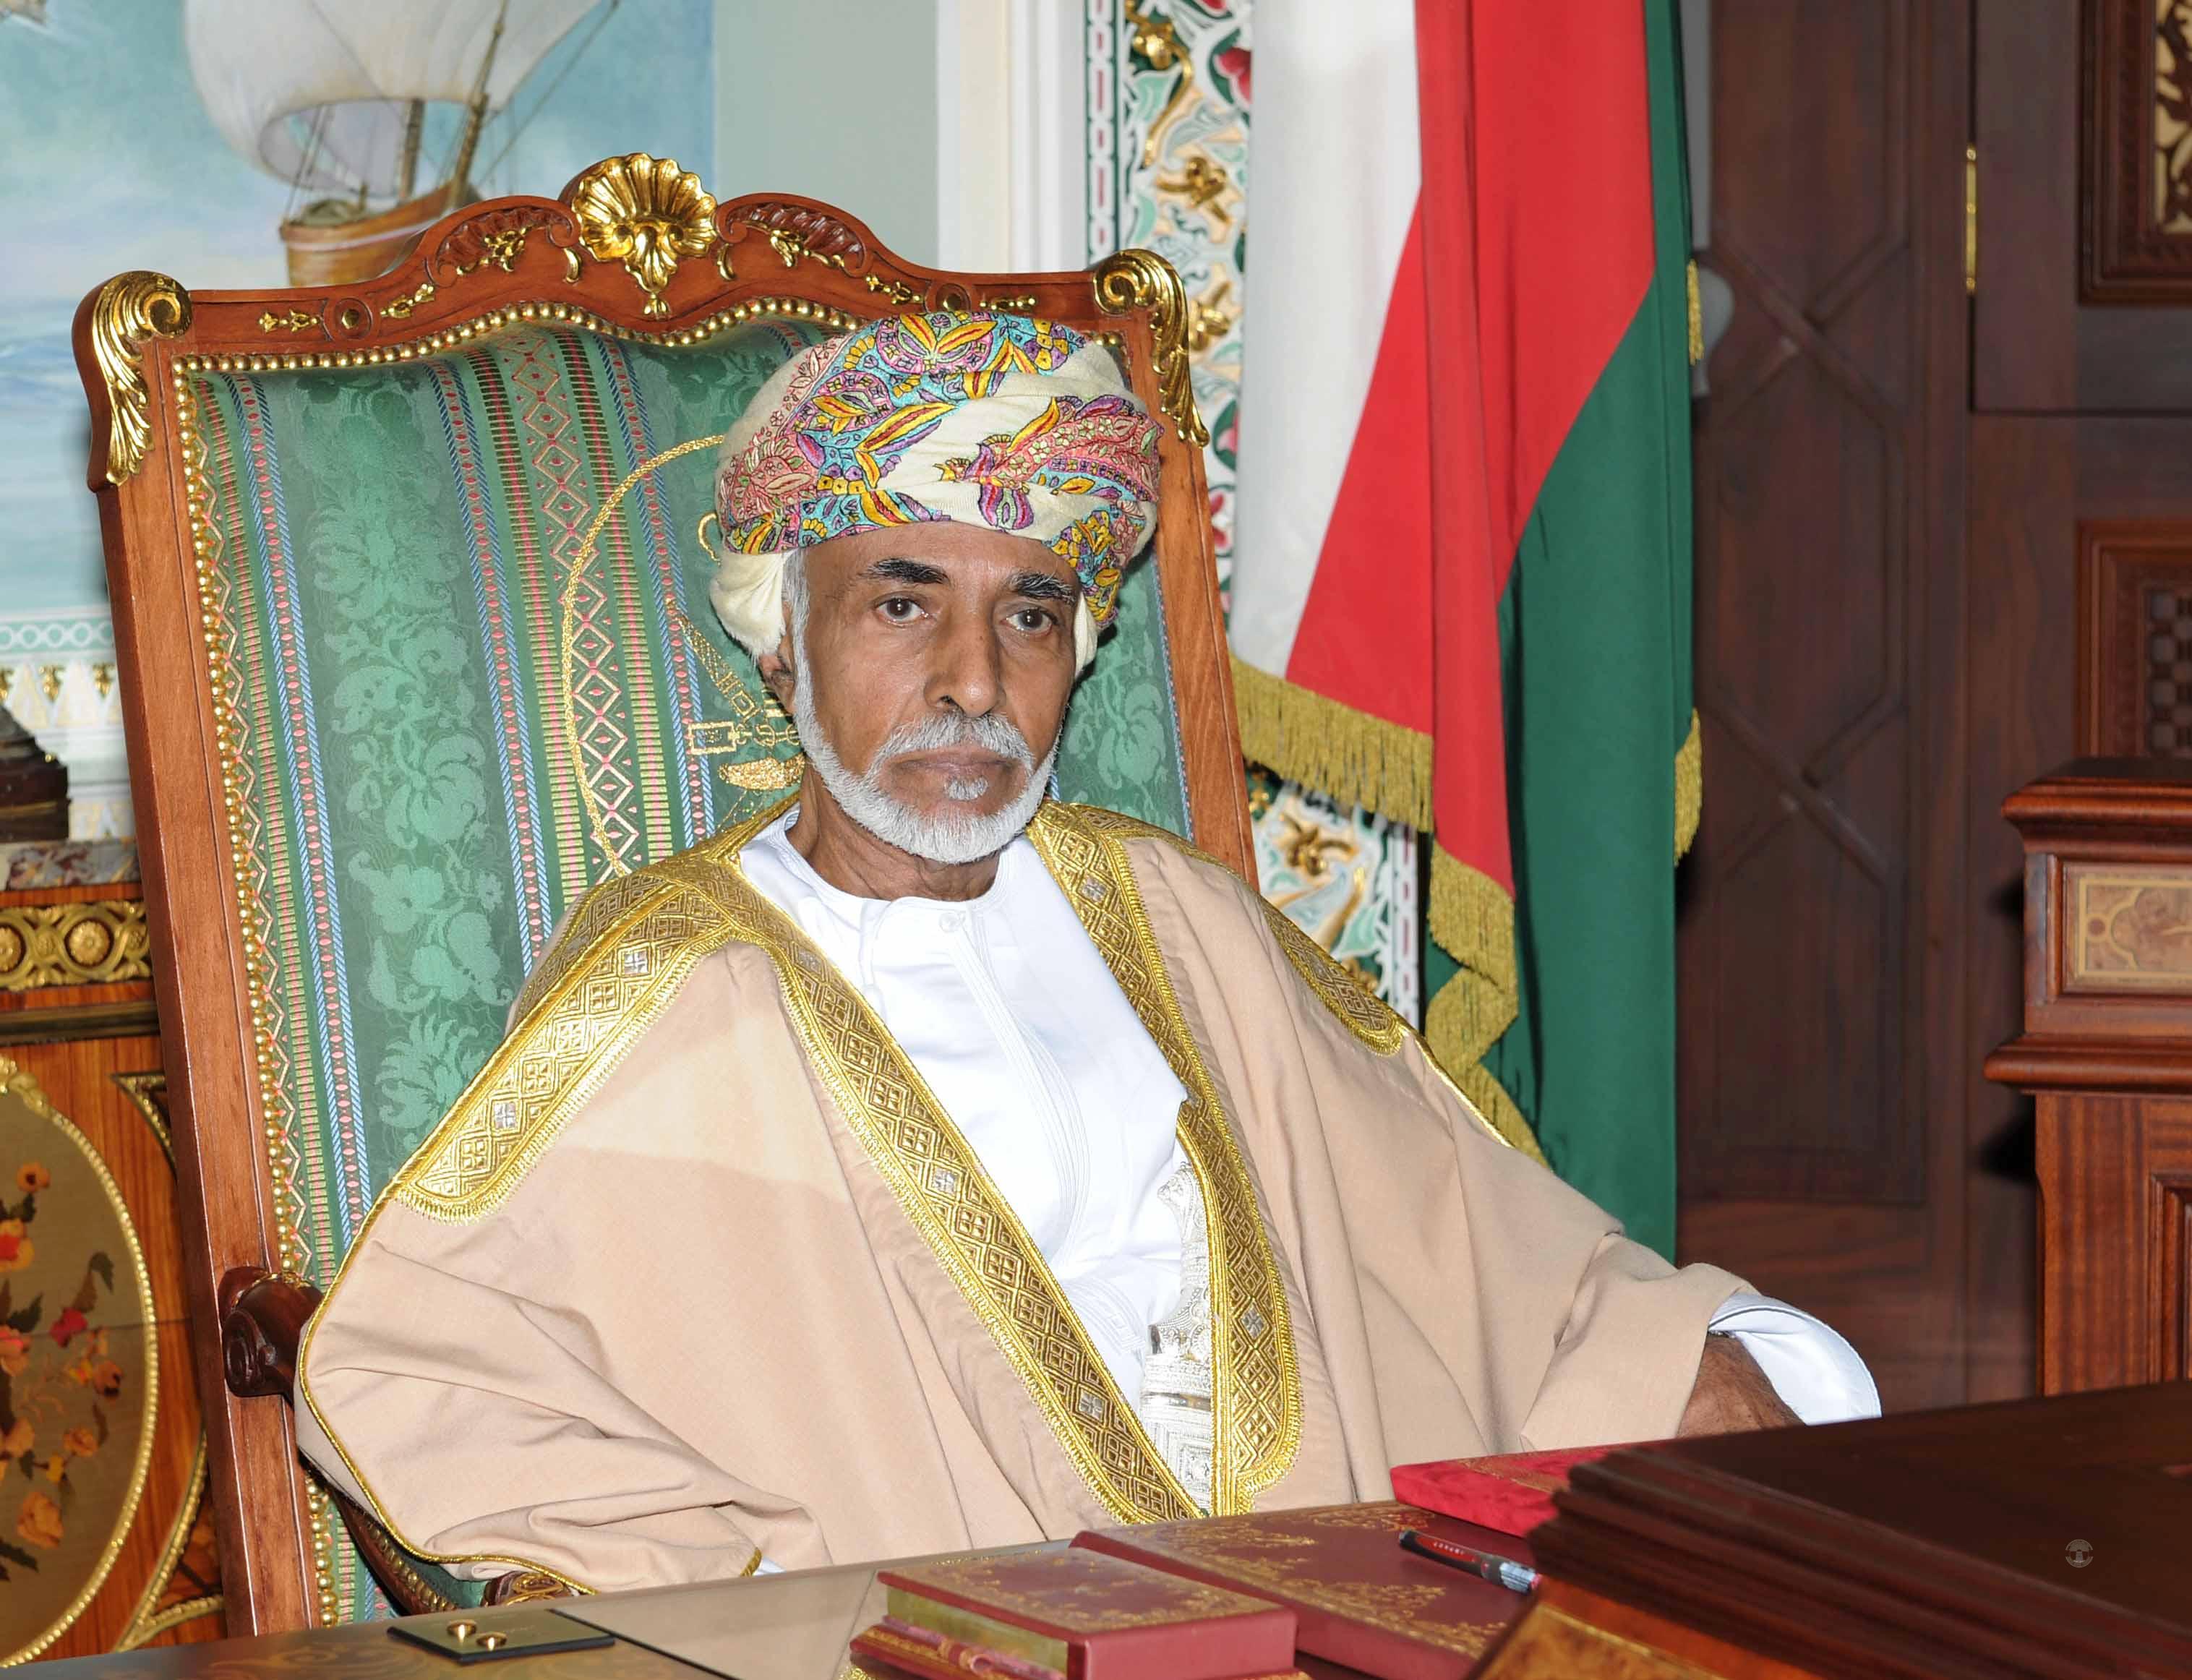 His Majesty receives thanks from Mauritanian president